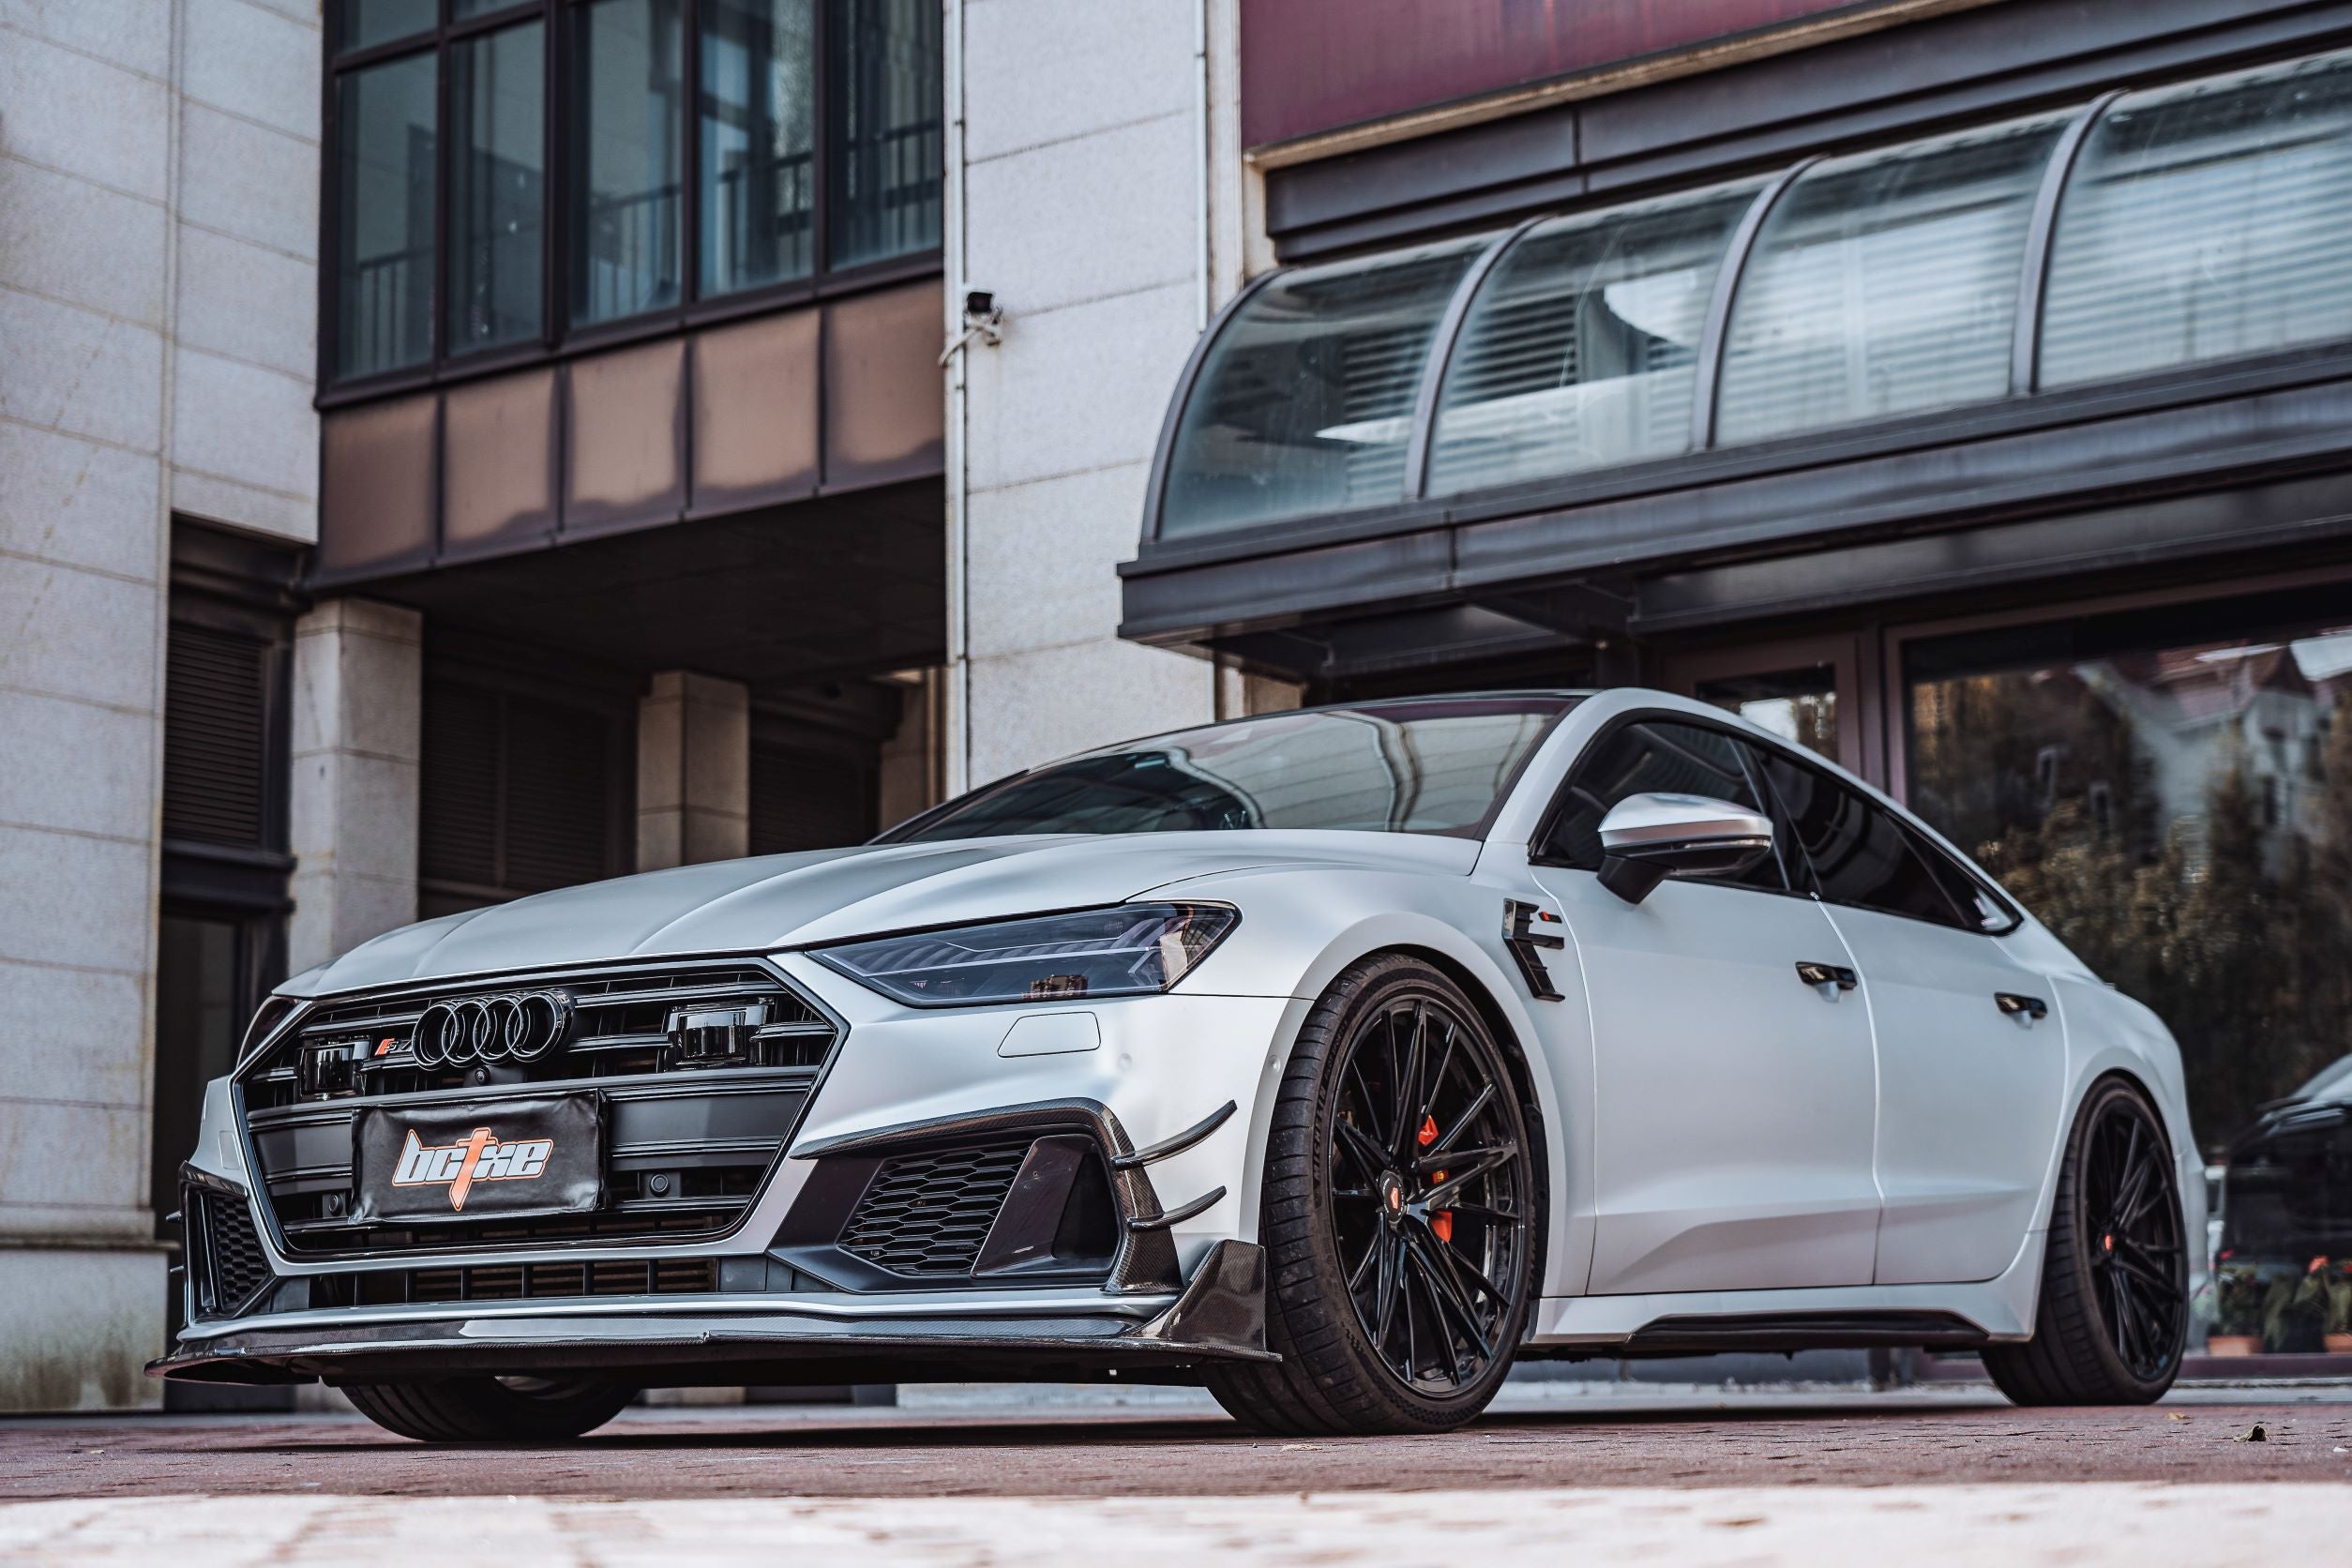 BCTXE Tuning Carbon Fiber Front Bumper Canards for Audi S7 & A7 S Line & A7 2019-ON C8